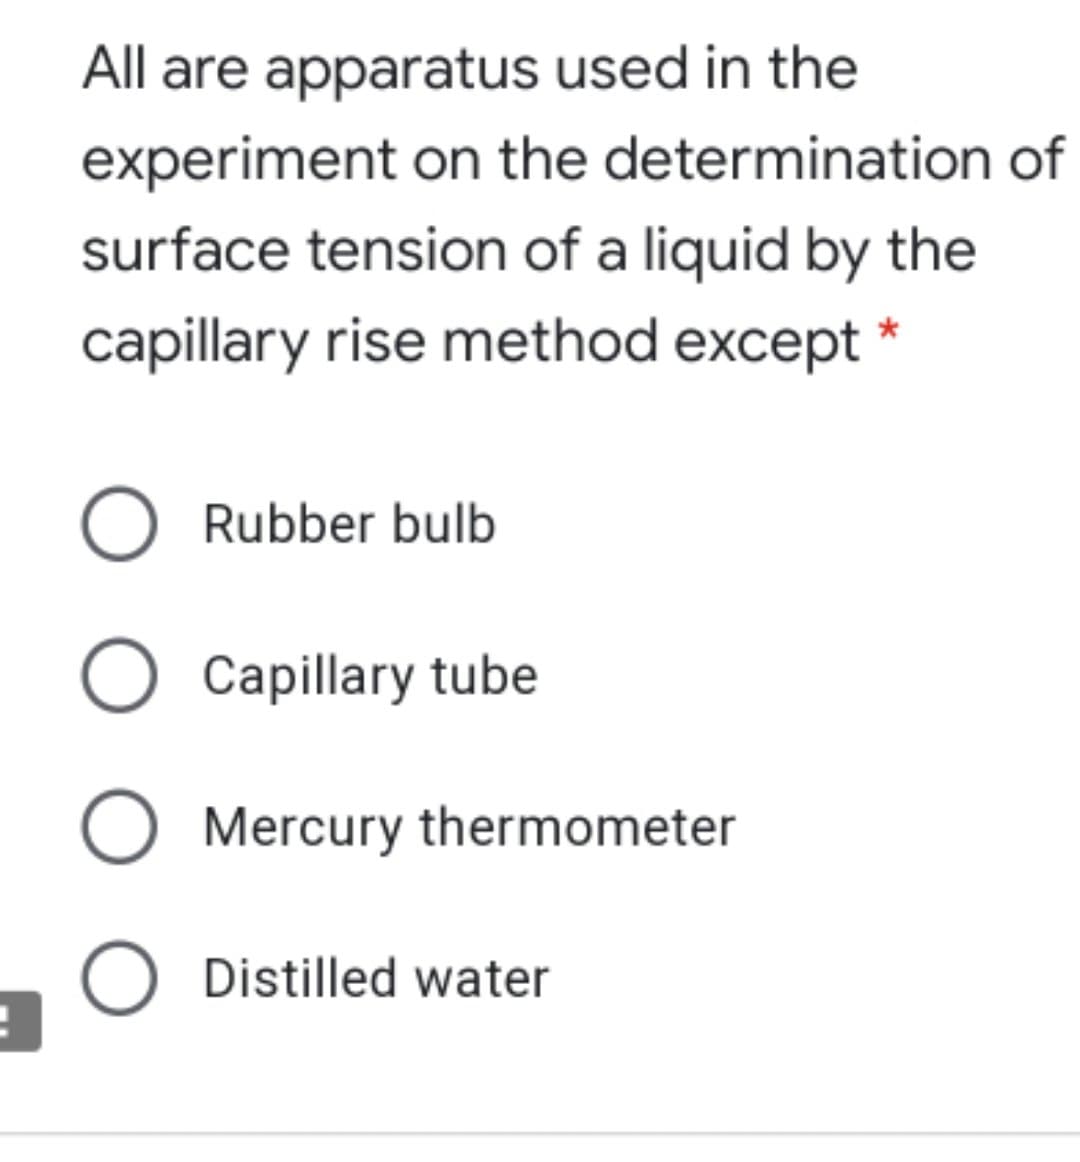 All are apparatus used in the
experiment on the determination of
surface tension of a liquid by the
capillary rise method except *
Rubber bulb
Capillary tube
O Mercury thermometer
O Distilled water
